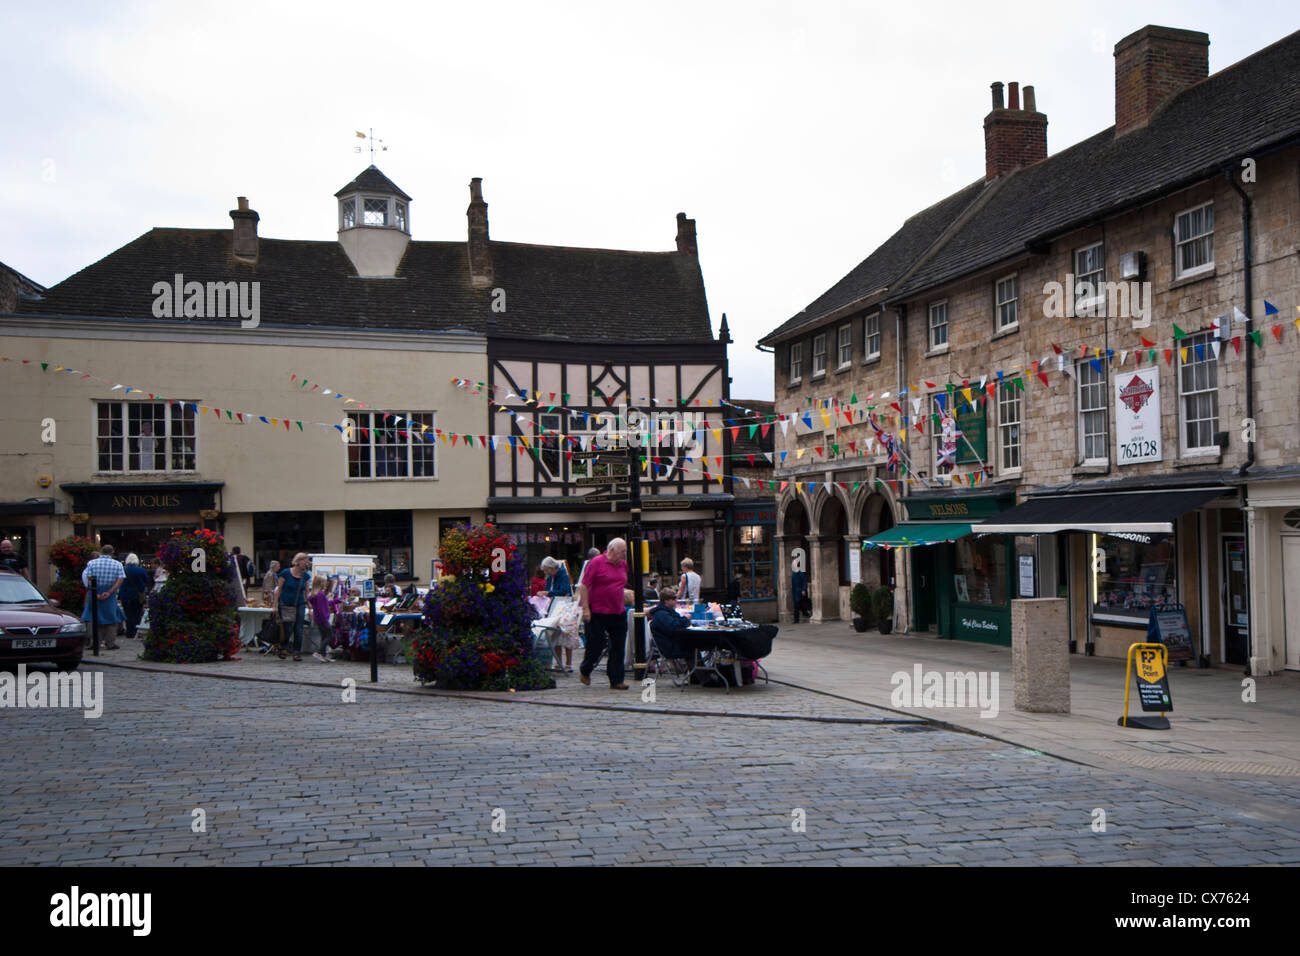 Arts and crafts market, Red Lion Square, Stamford, Lincolnshire, England, UK. Stock Photo